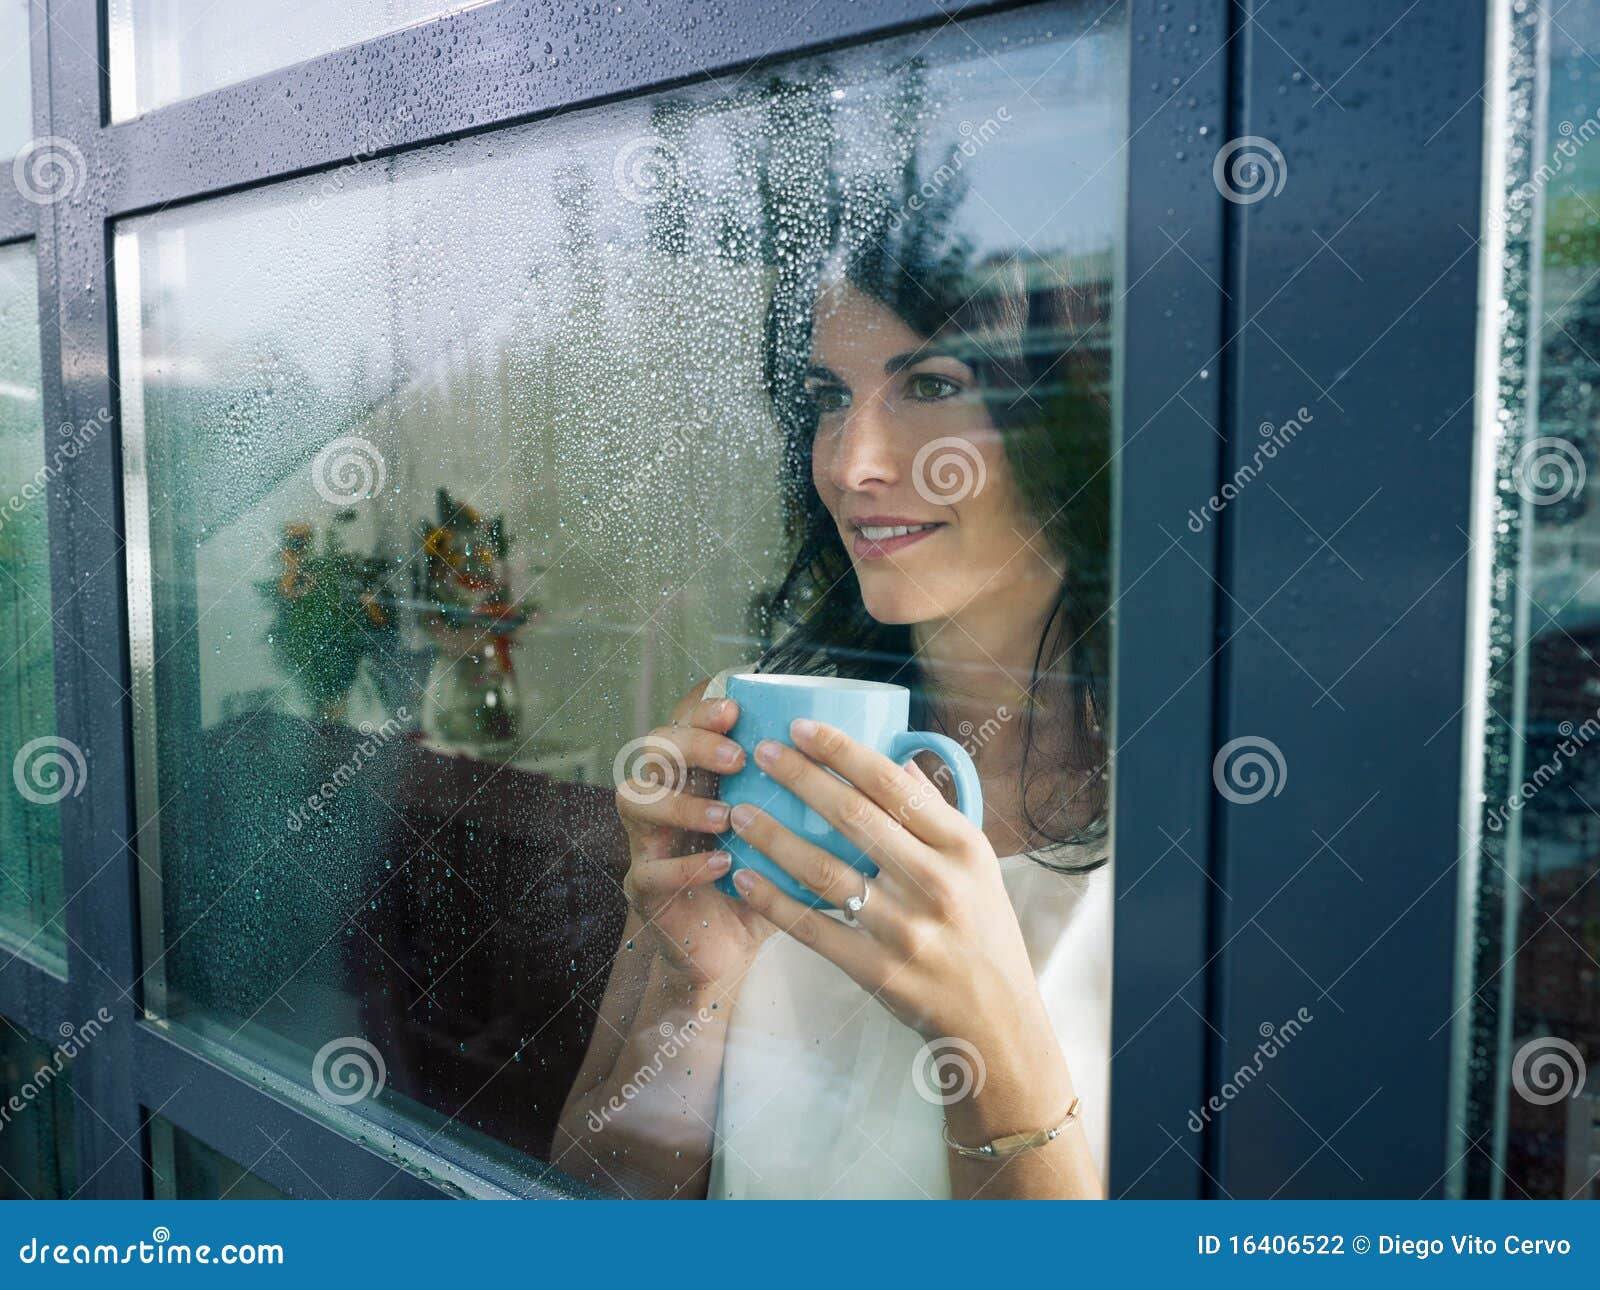 woman staring at the window